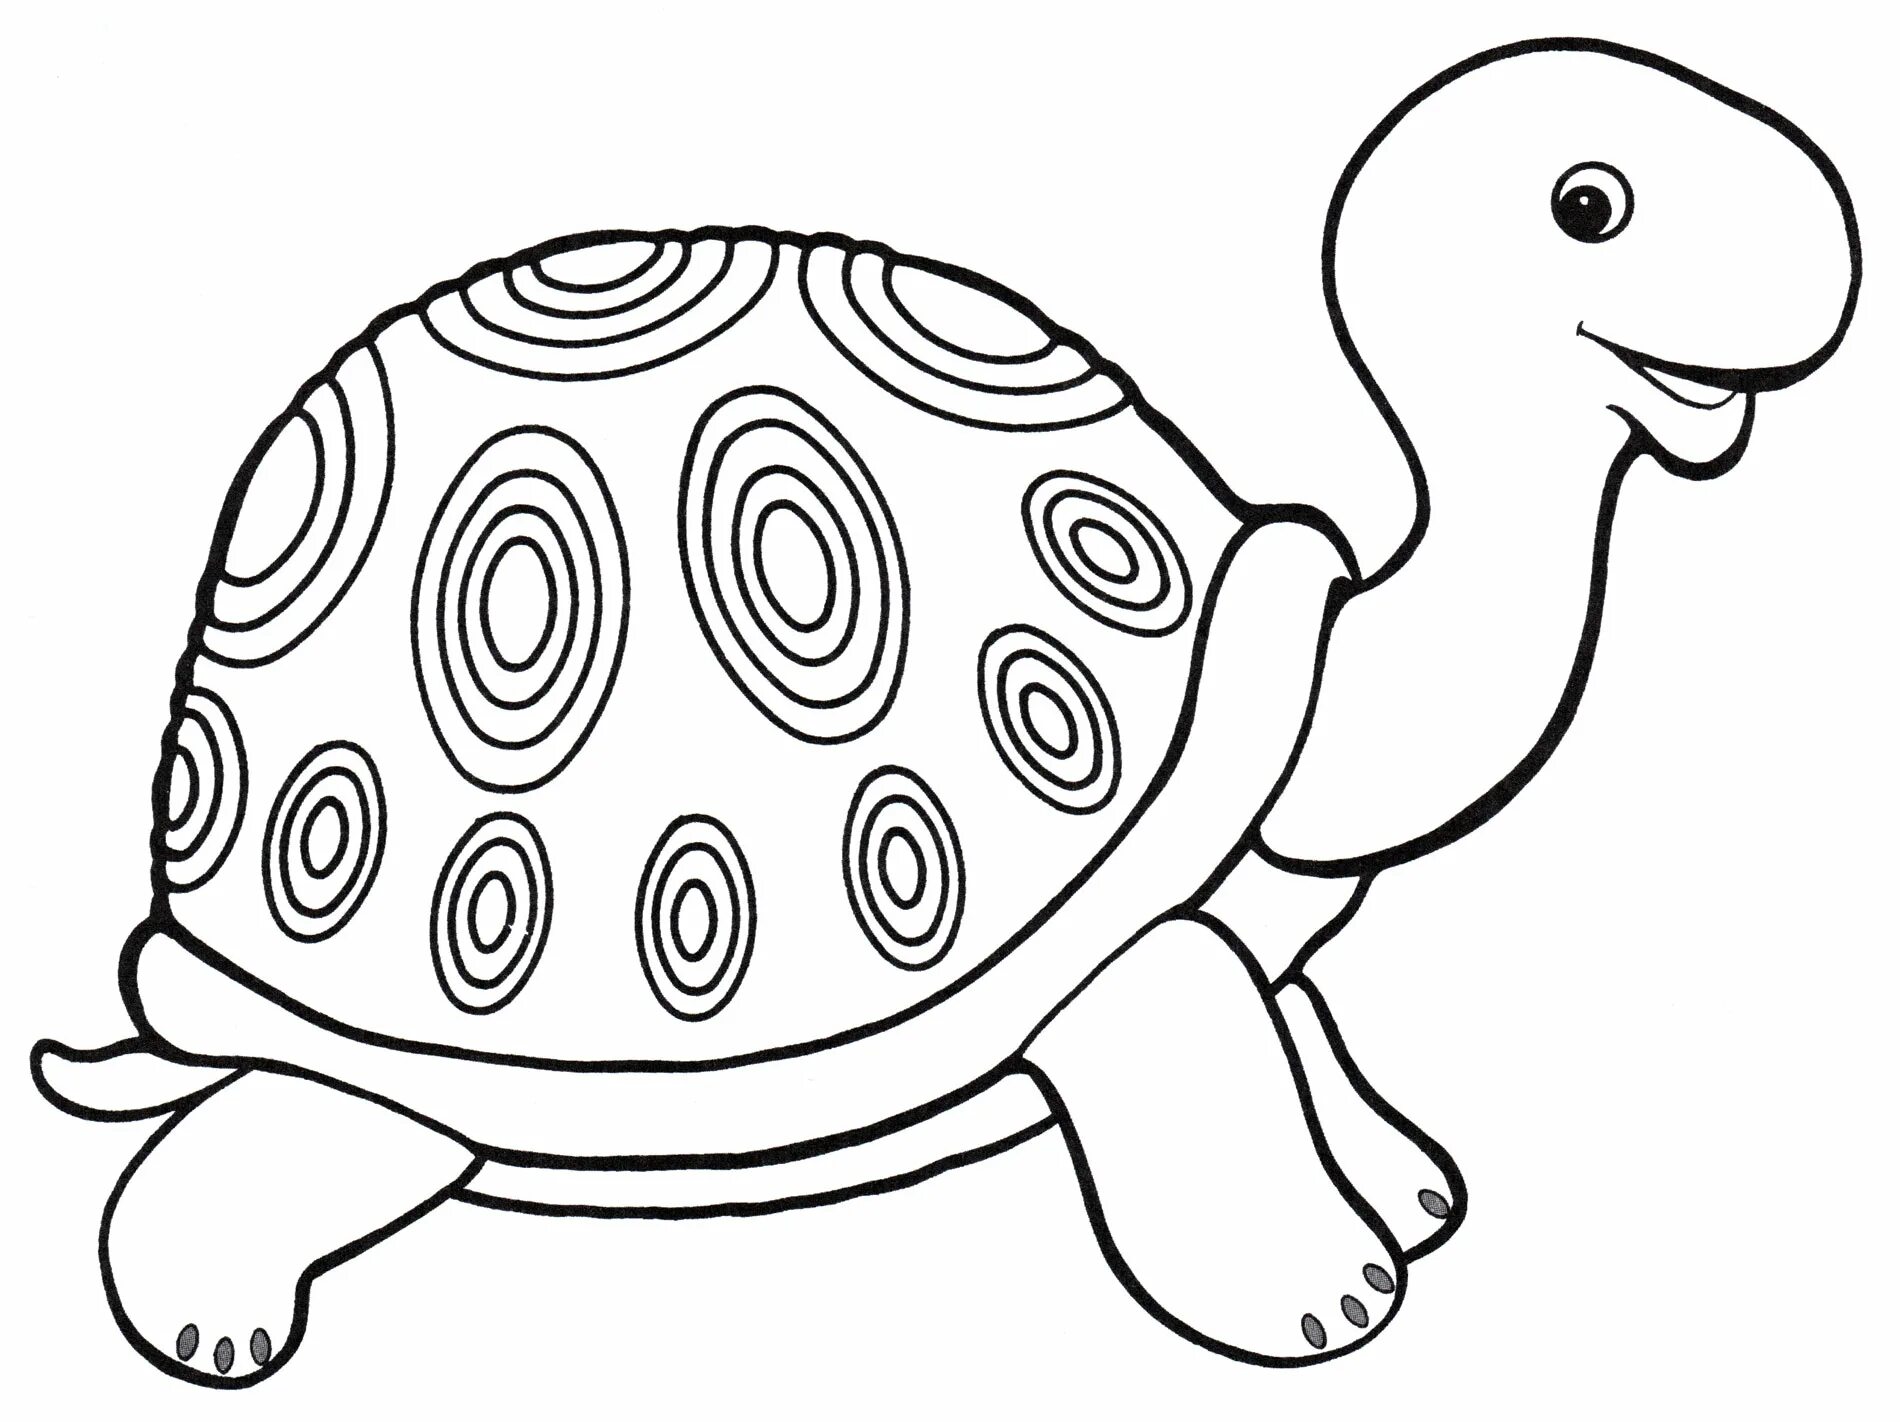 Turtle for children 6 7 years old #5